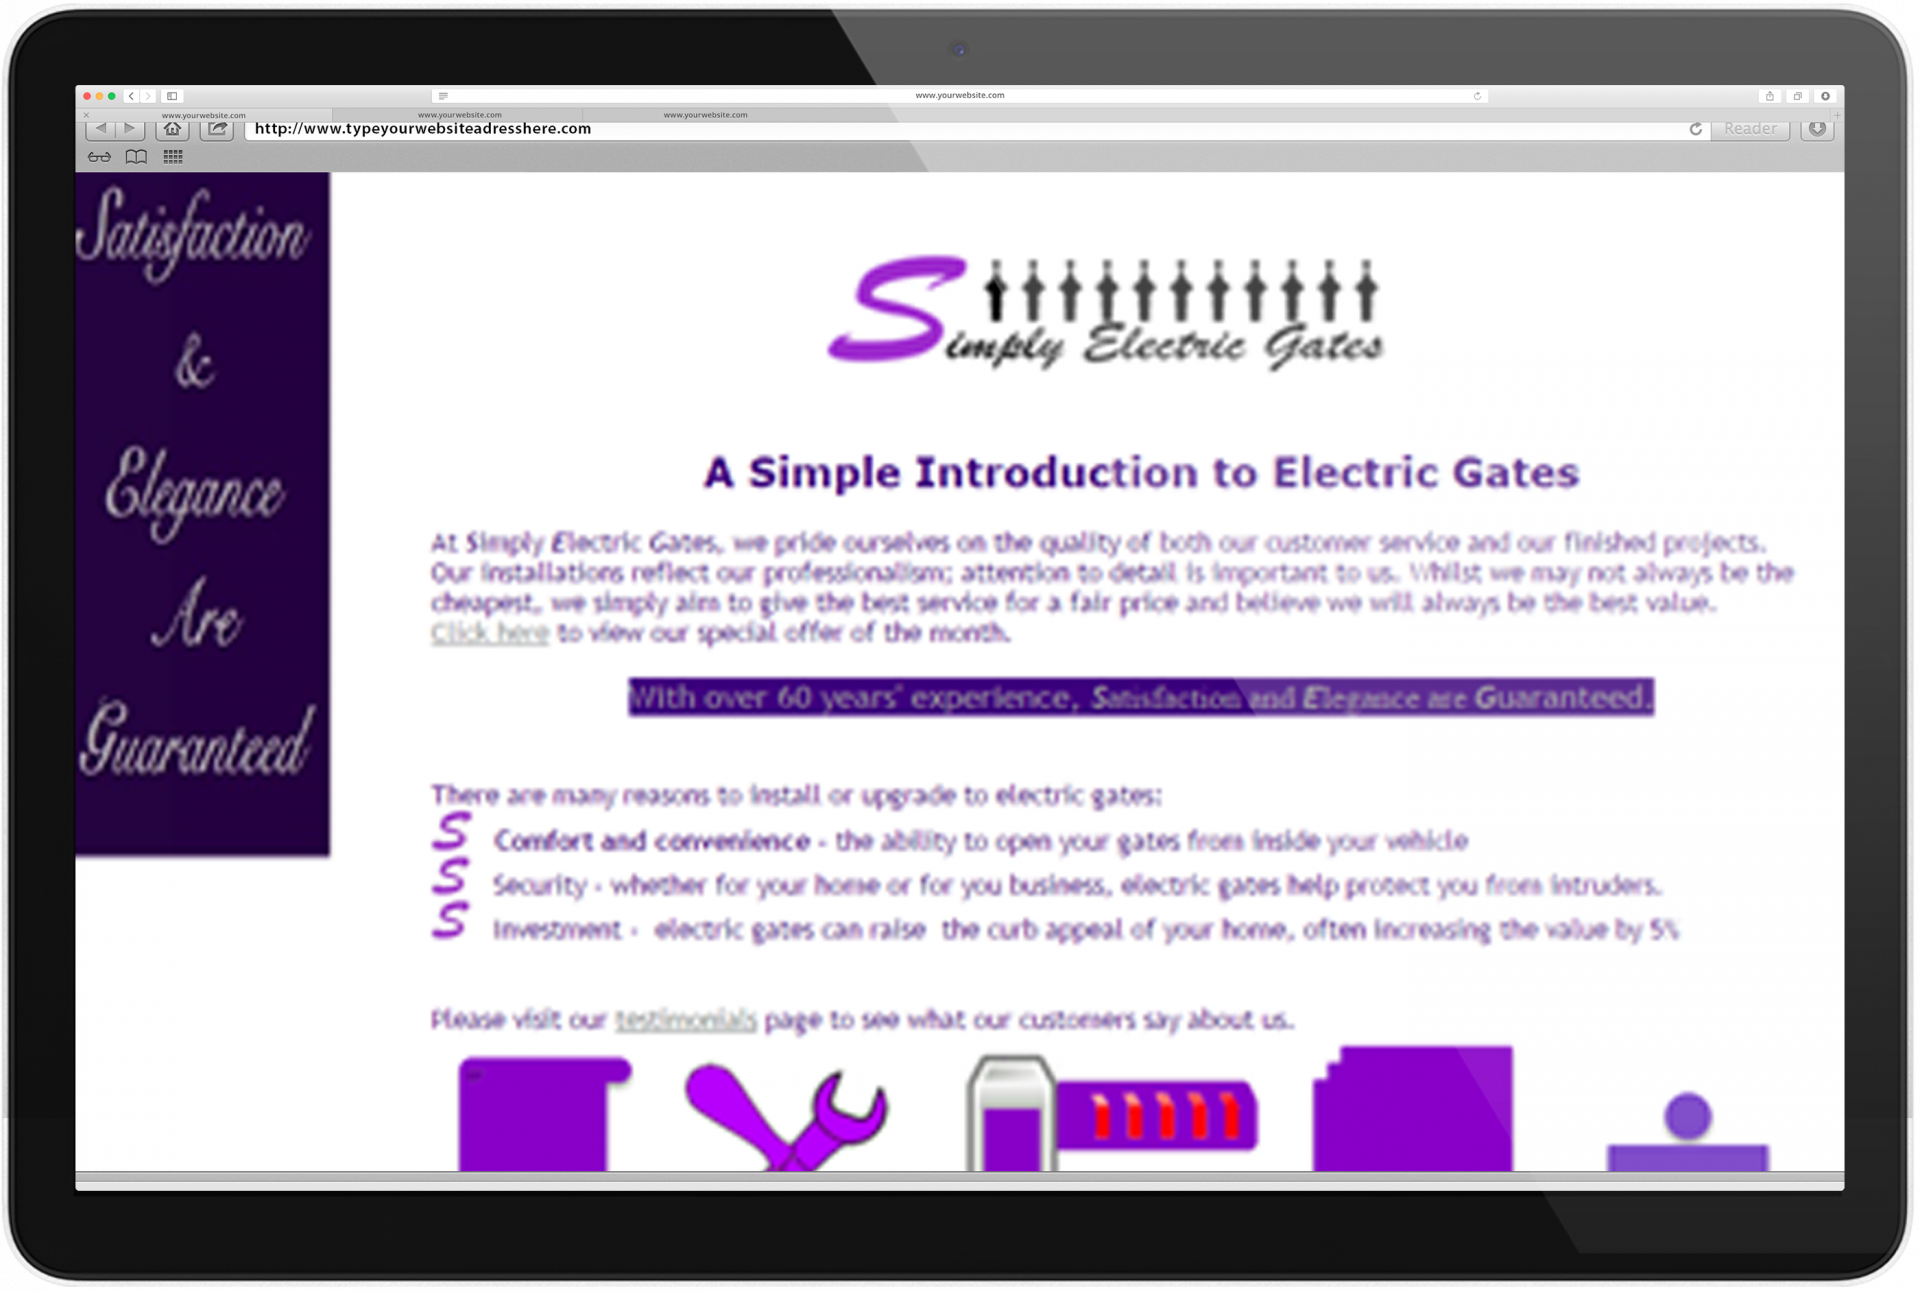 Electric gates contractors in the UK